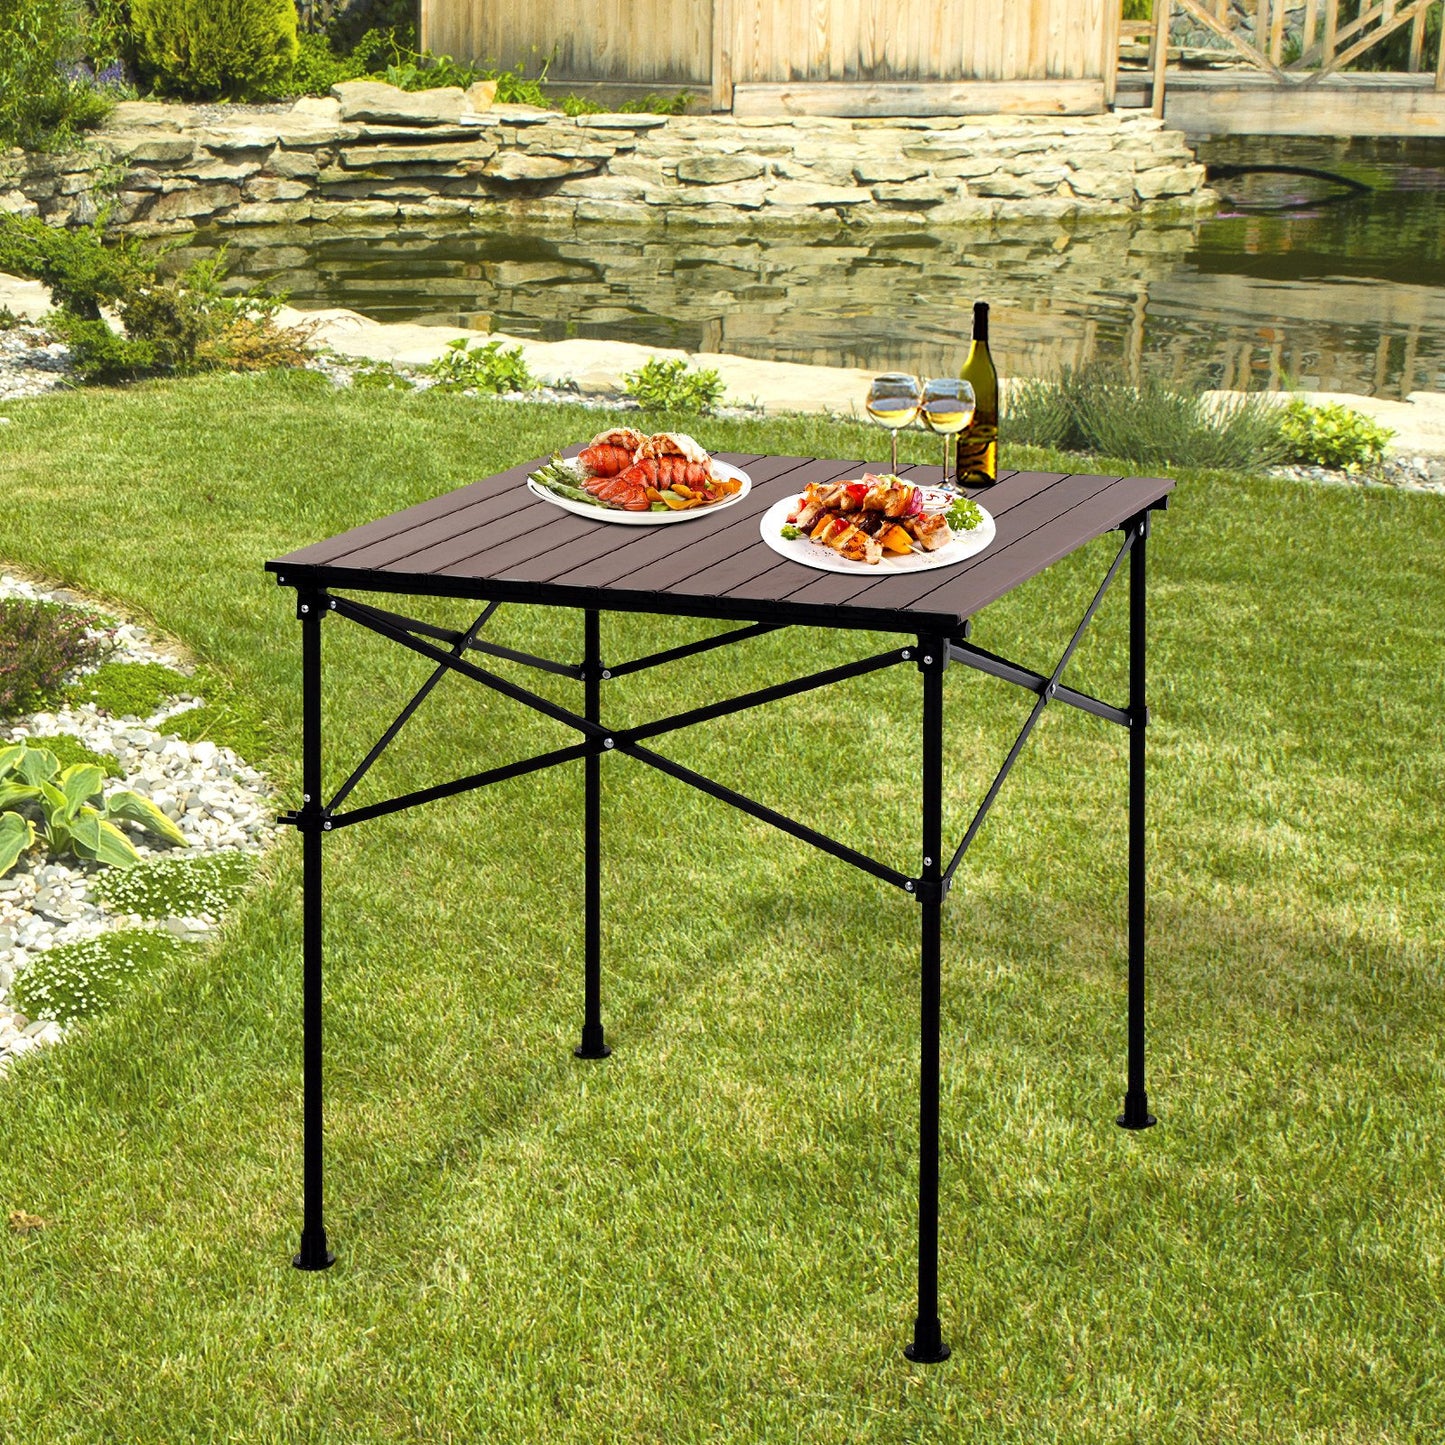 Outsunny Aluminium Folding Picnic Table Portable Camping Table w/ Carrier Bag